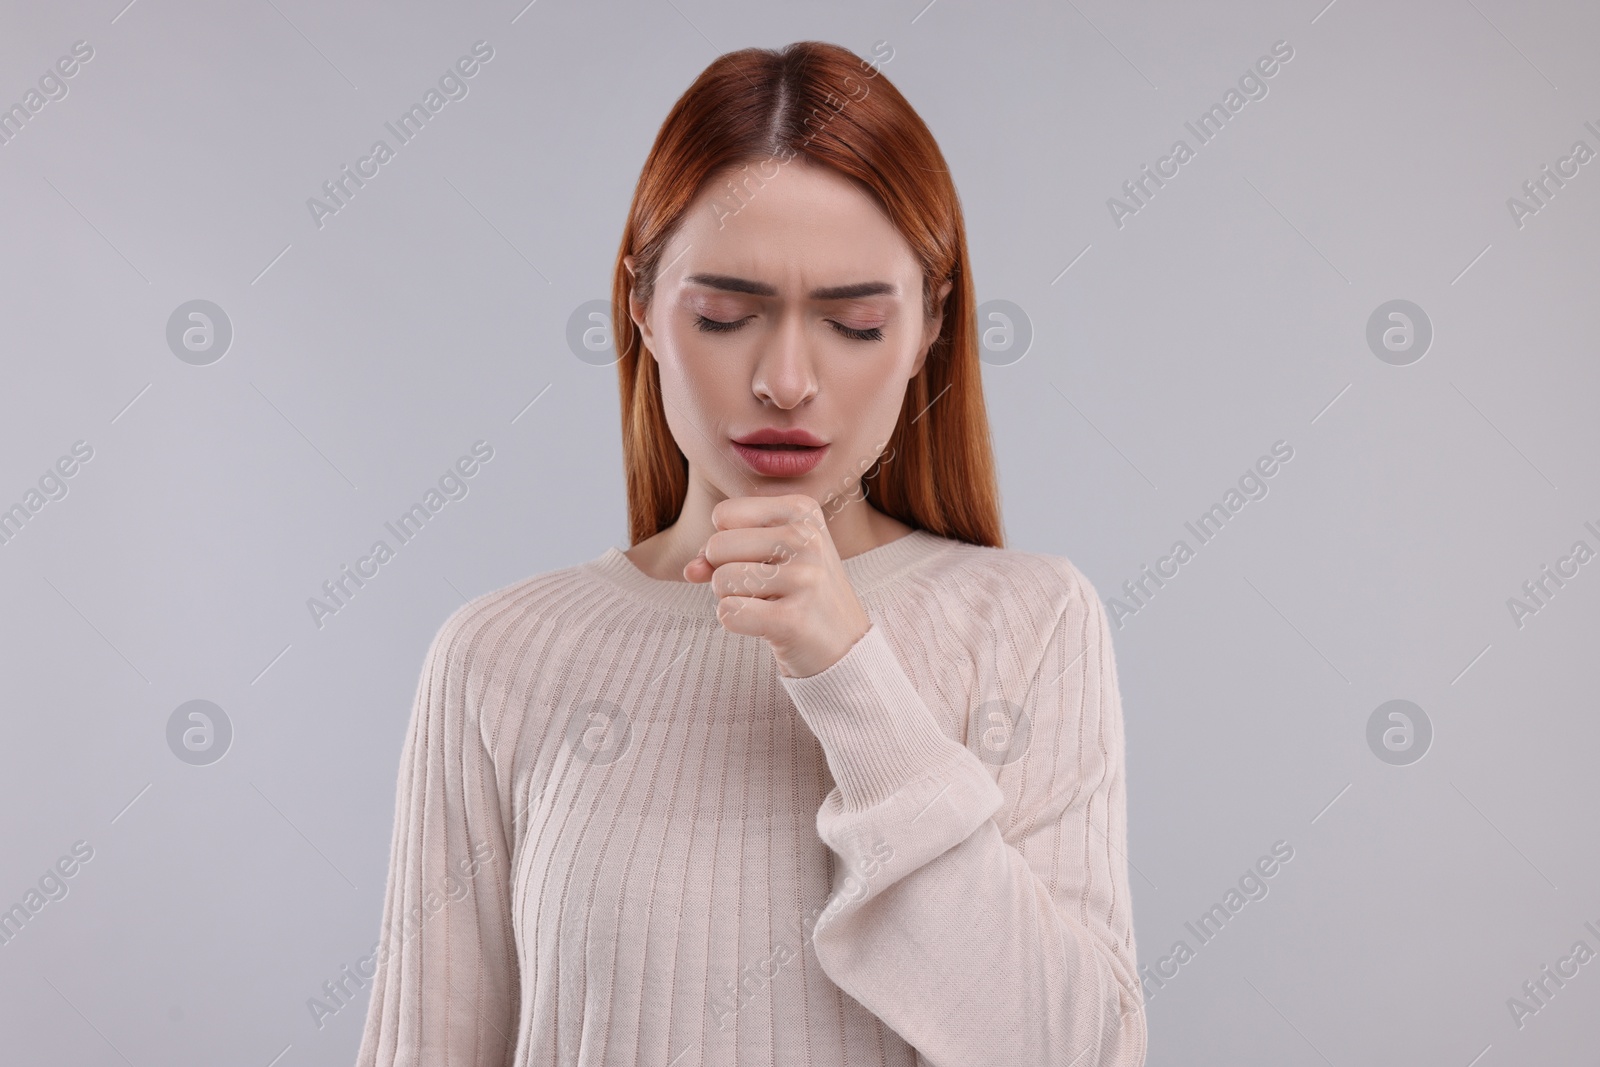 Photo of Woman coughing on light grey background. Cold symptoms